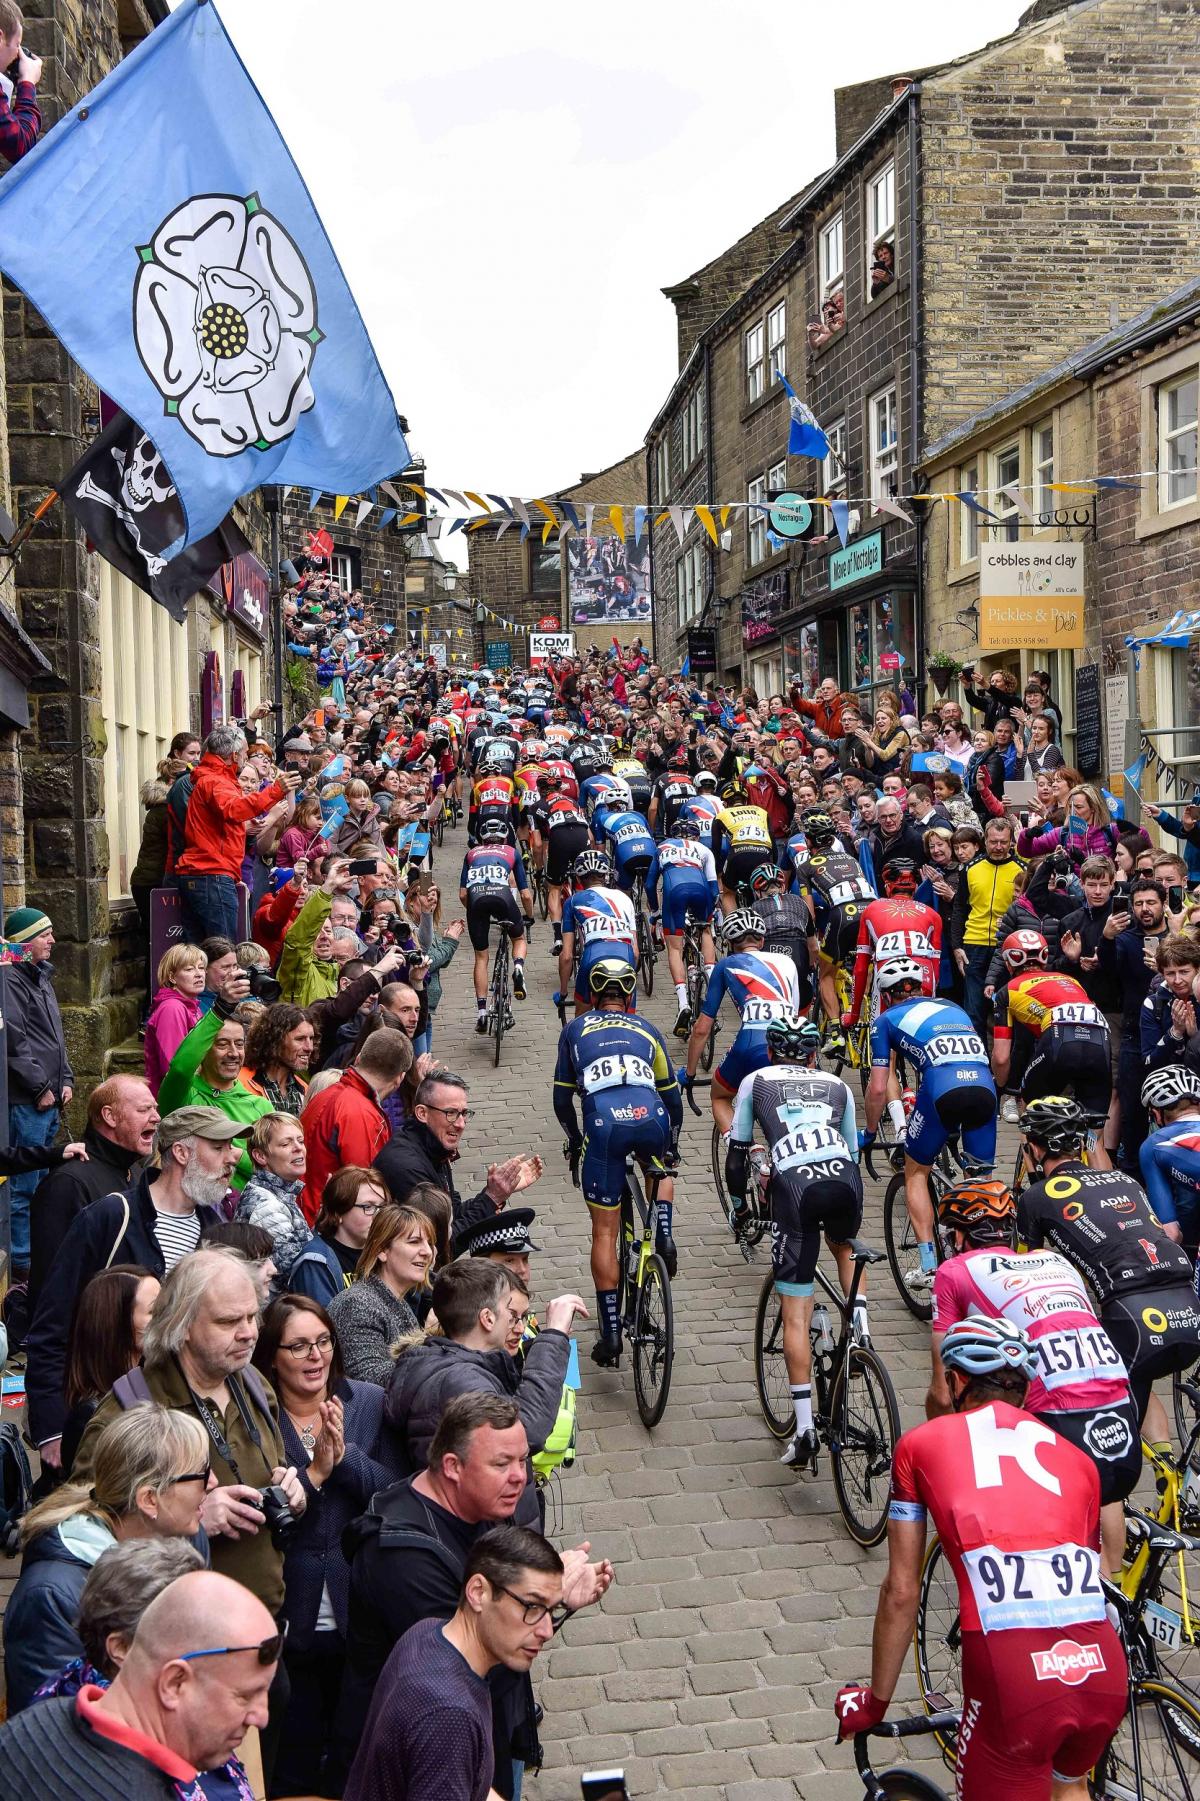 MAY Tens of thousands of people across the district lined the streets to cheer on riders in the Tour de Yorkshire